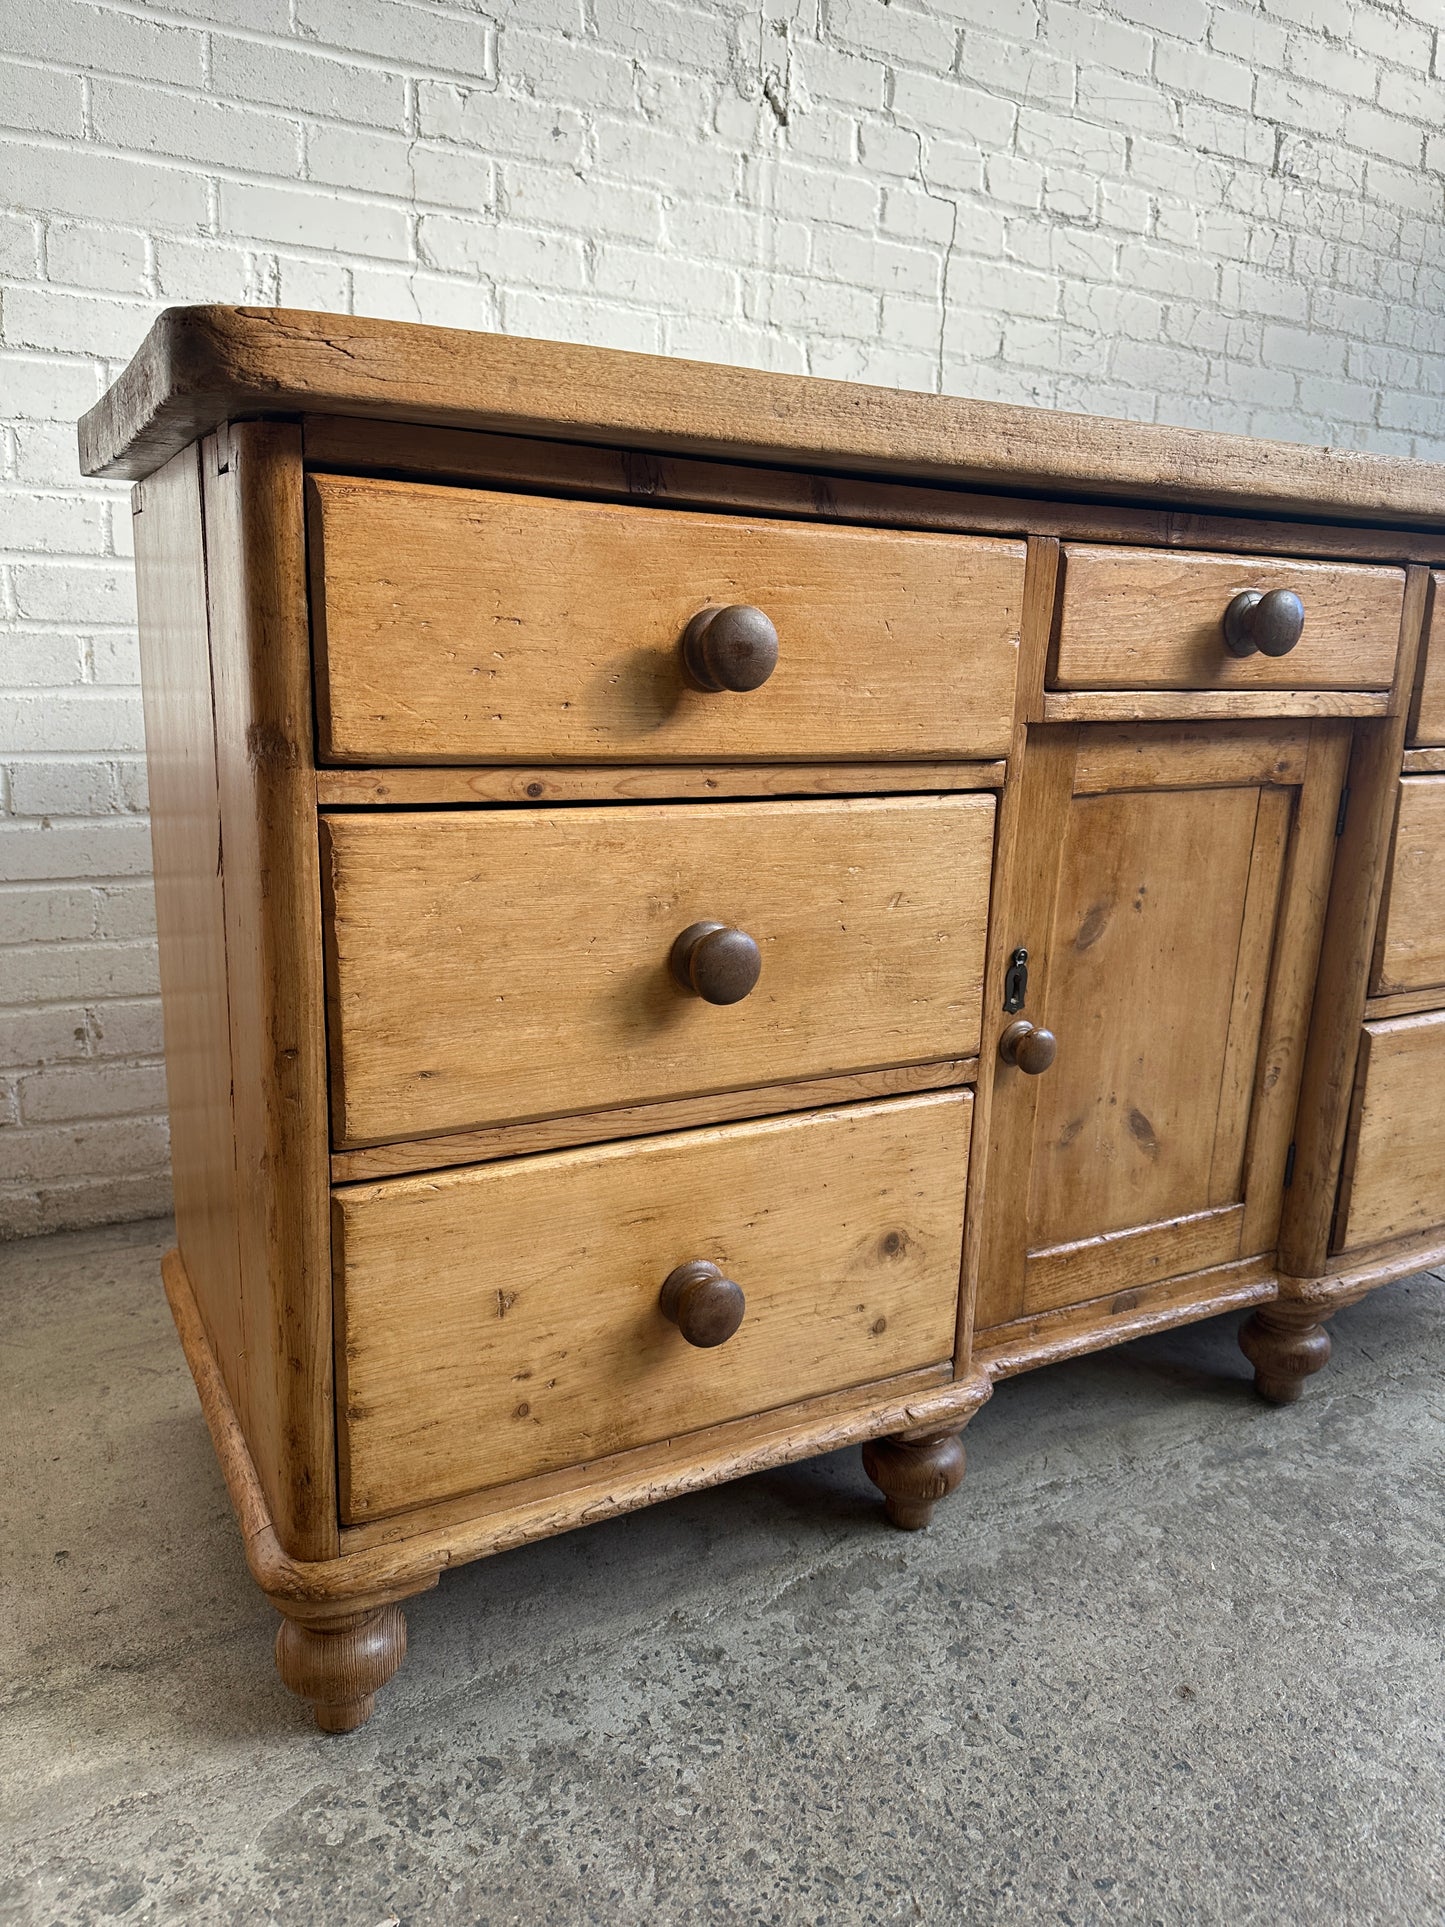 Antique Pine and Sycamore English Sideboard c. 1875